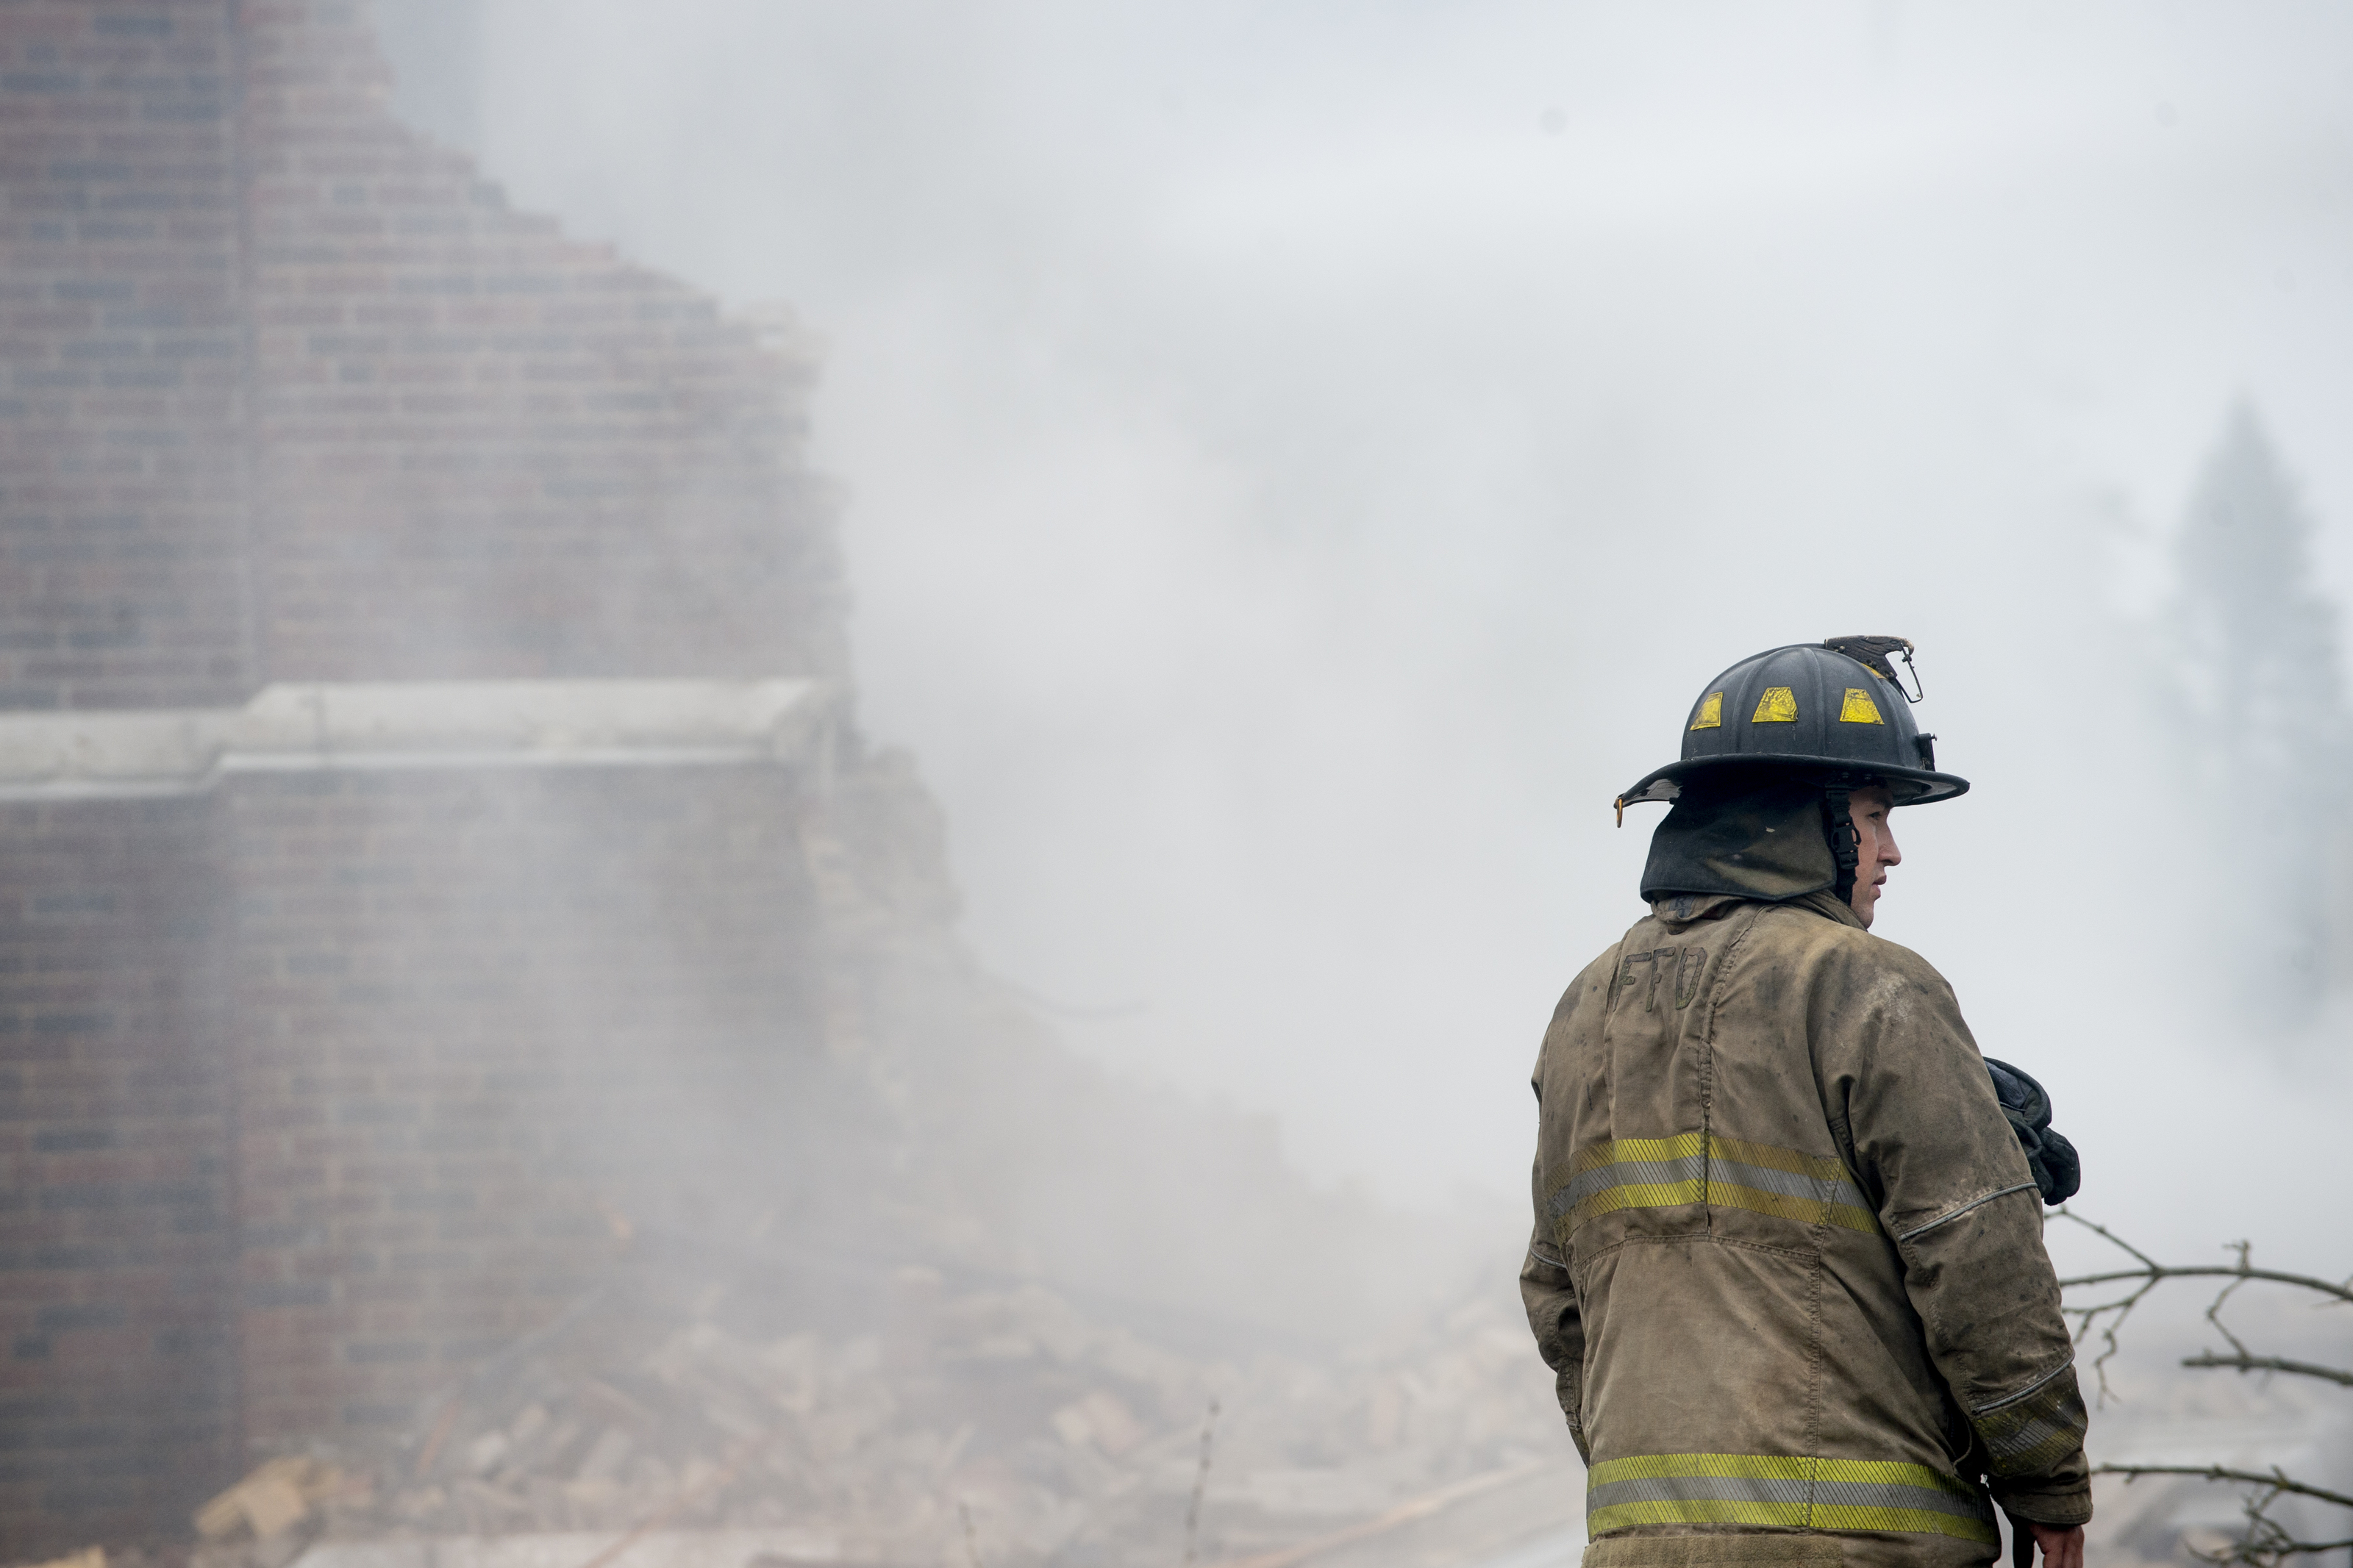 Firefighters work to contain a fire that started at about 12:30 a.m. on Thursday Oct. 7, 2021 at the former Washington Elementary School, located at 1400 N. Vernon Ave. in Flint. The building was built in 1922 before closing in 2013. (Jake May | MLive.com)